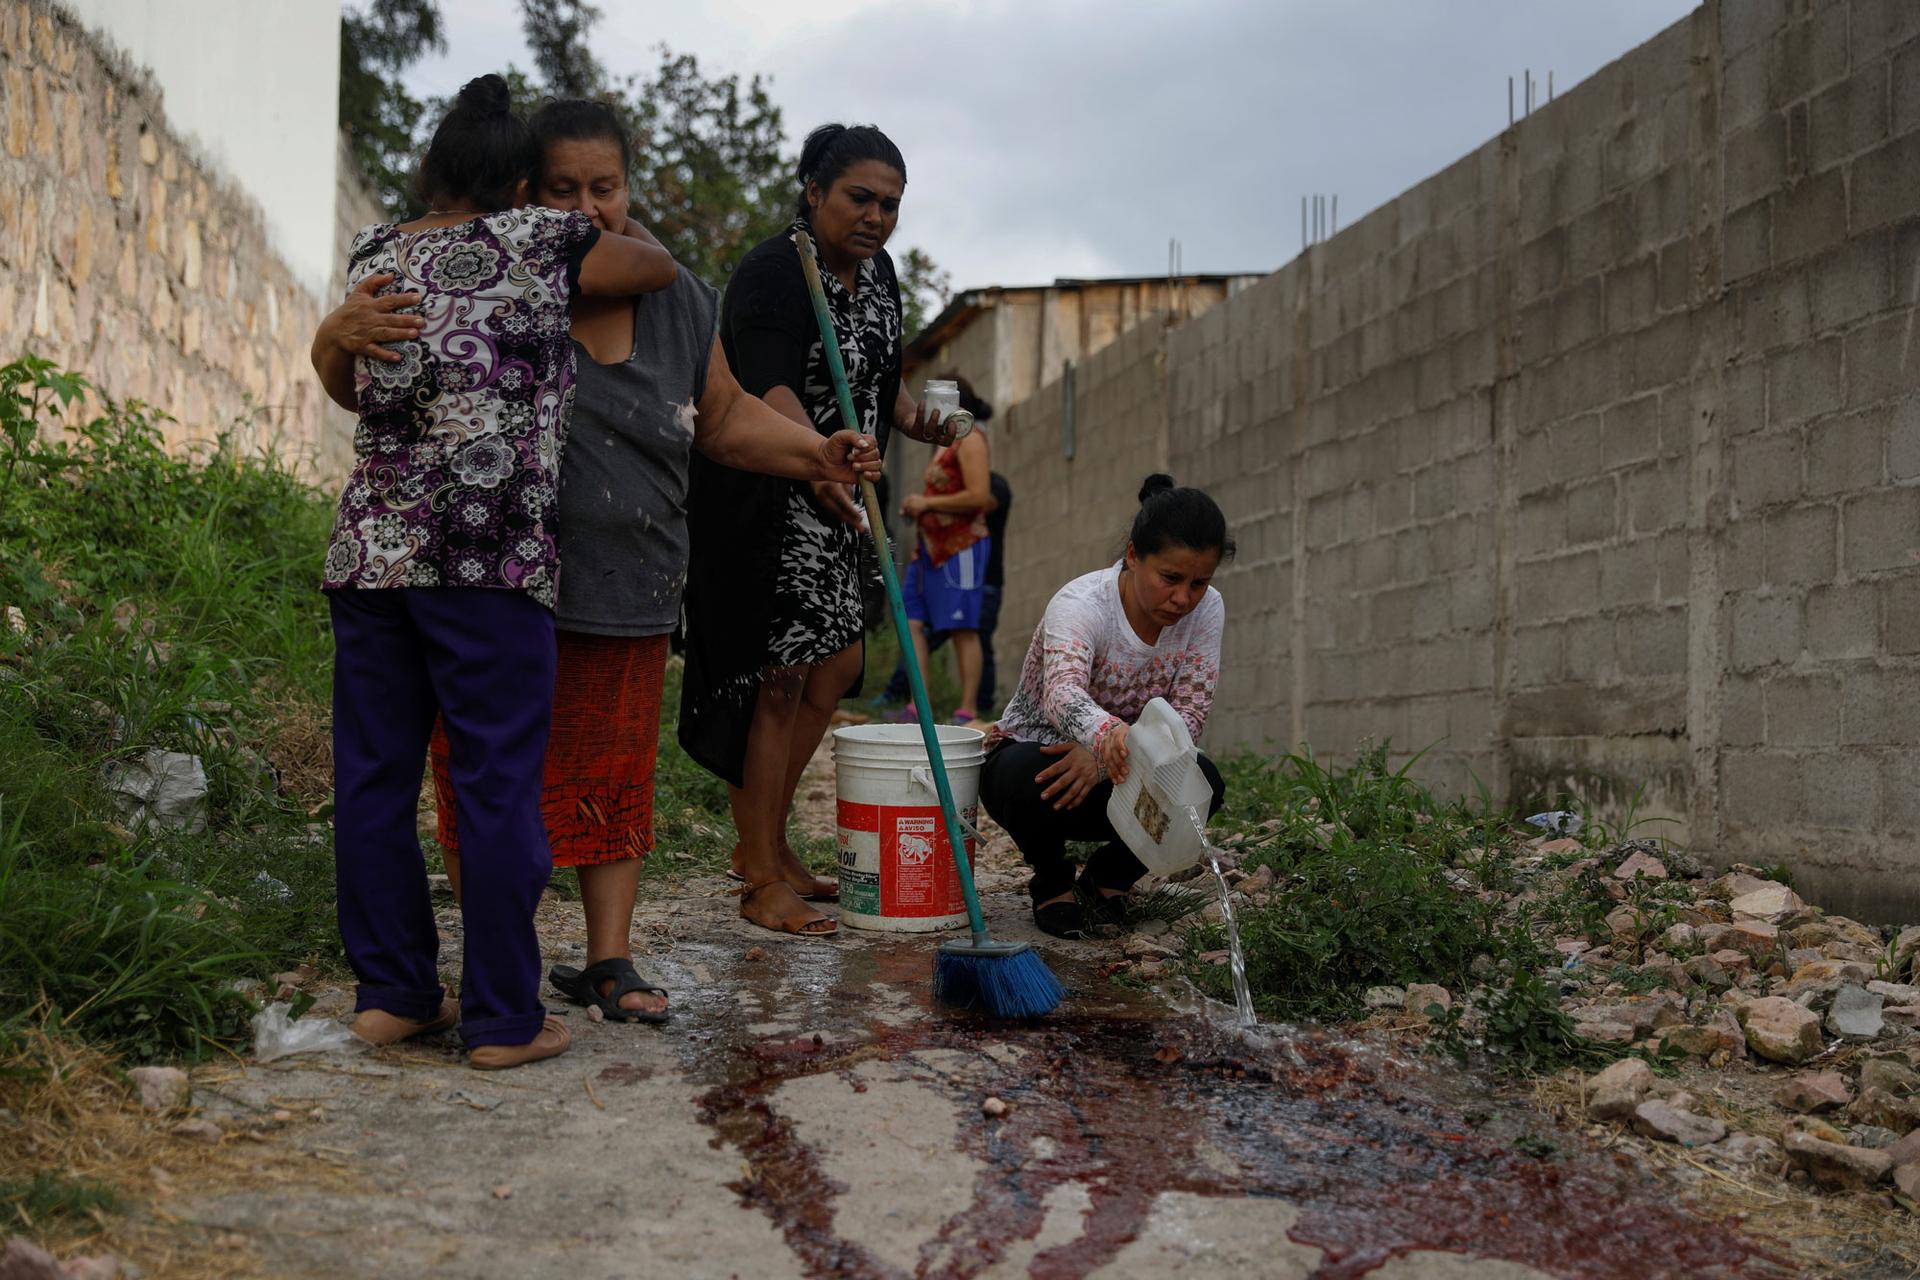 Relatives and friends of Ronald Blanco are shown in the street, a pair hugging and another wash the blood from the crime scene.